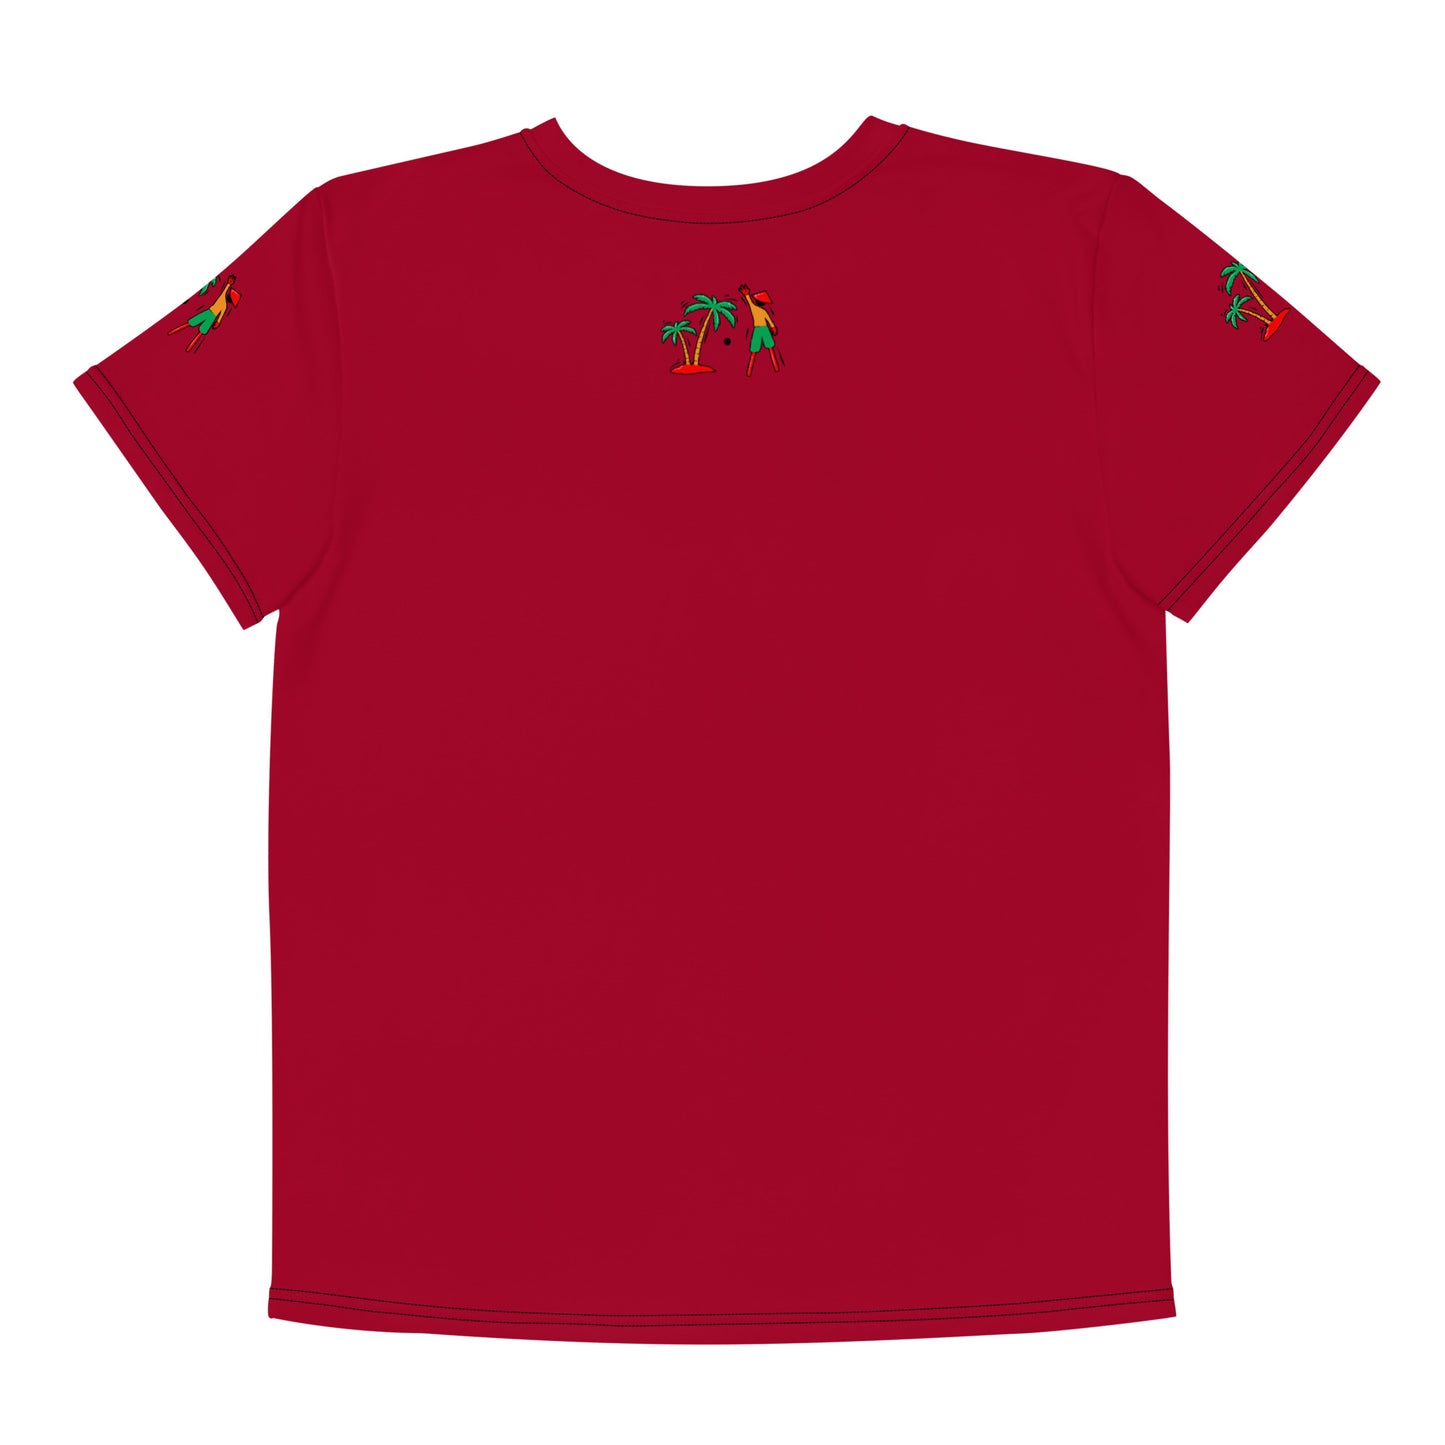 Maroon V.Localized (Ice/Gold/Green) Youth Dry-Fit T-Shirt